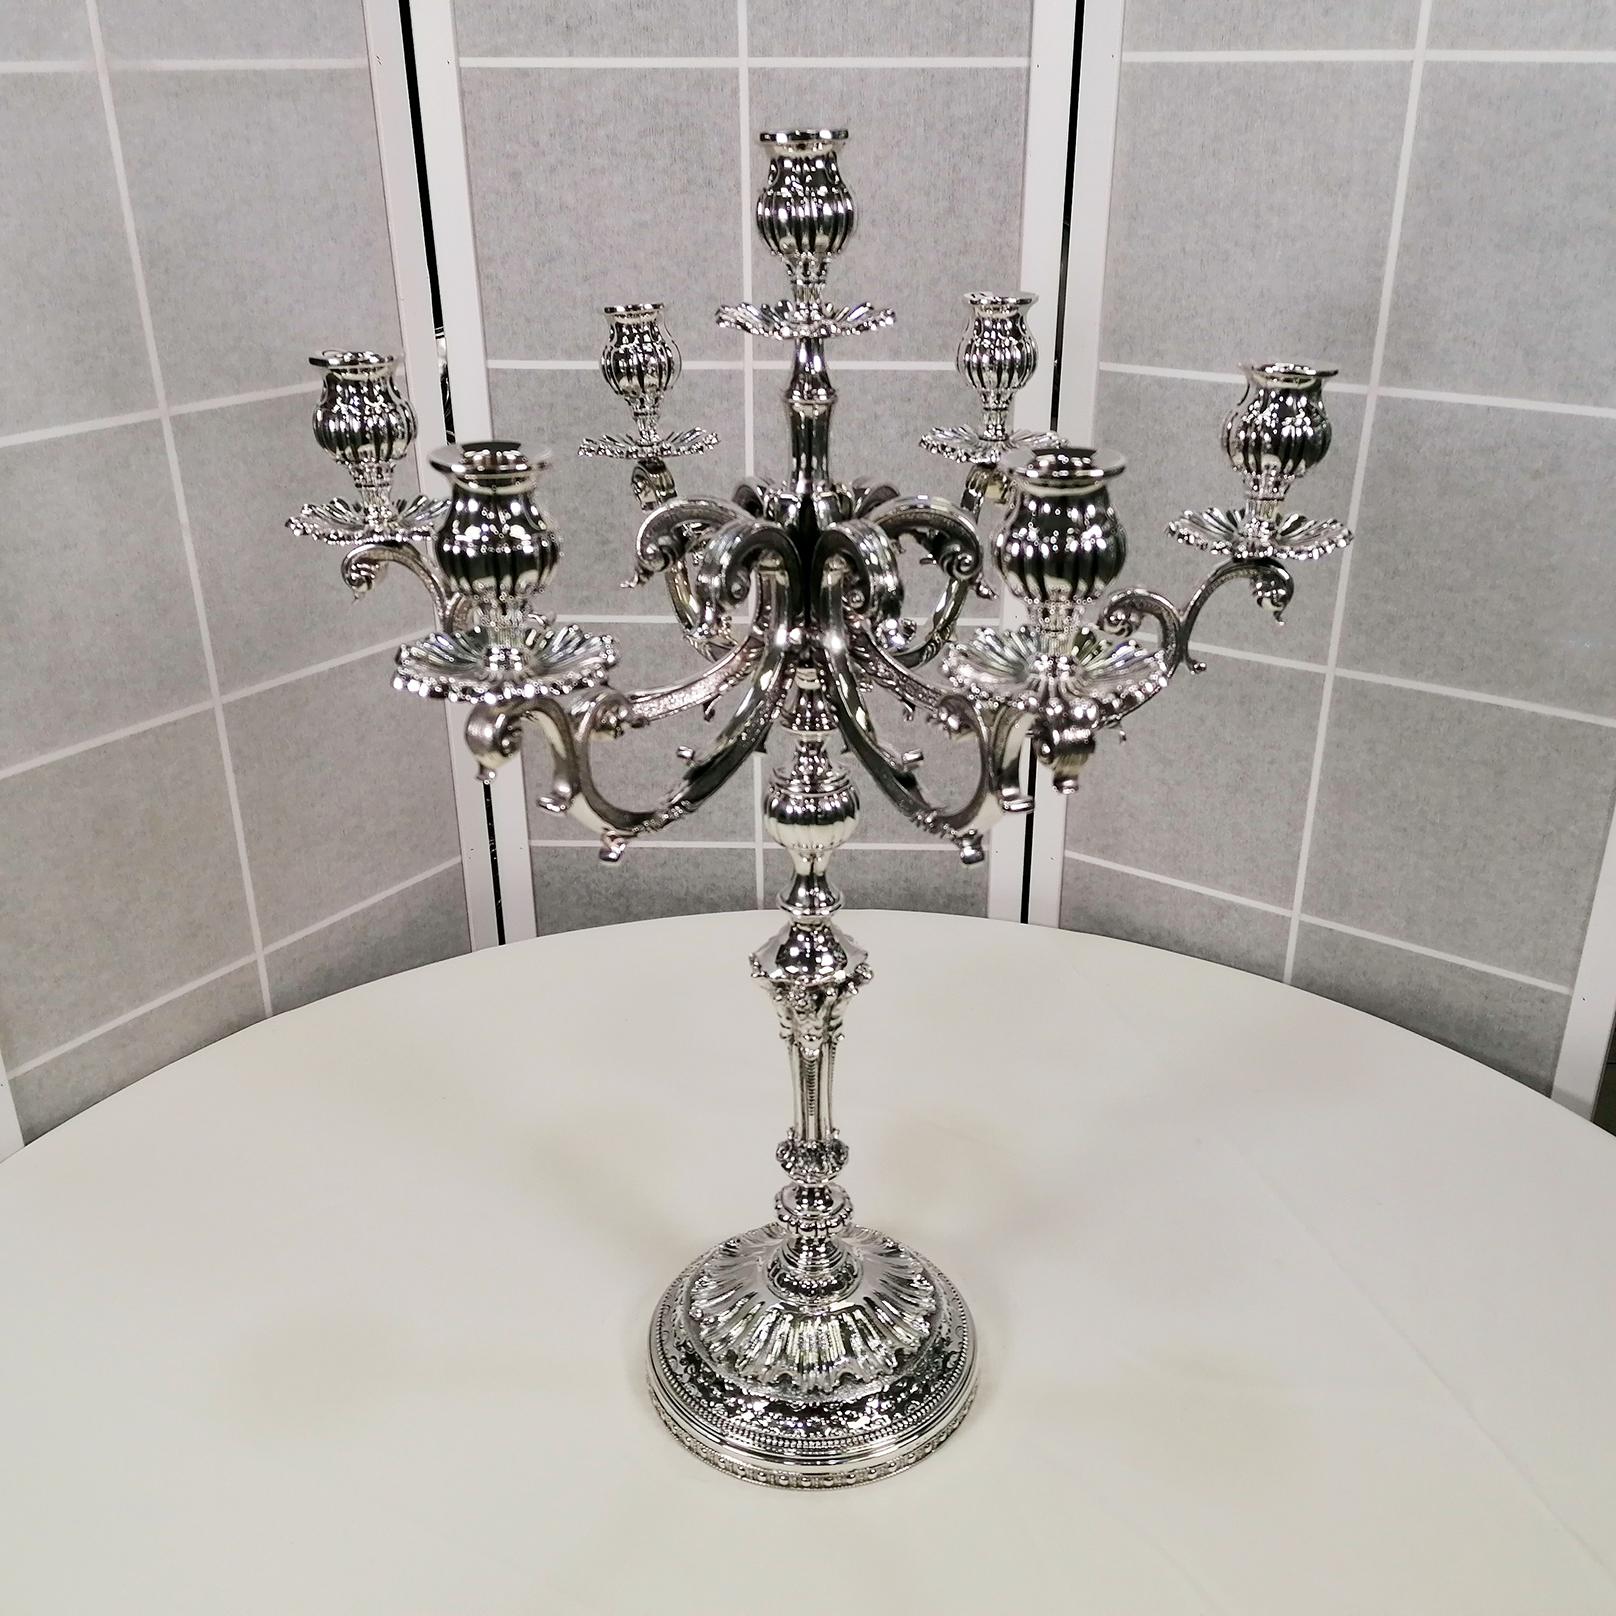 Stunning candlestick in solid 800 silver made with the fusion technique.
The round base, finely engraved and chiseled with beaded and wave motifs, has a diameter of 17.5 cm (6.9 in.) suitable for supporting the great weight of the entire structure